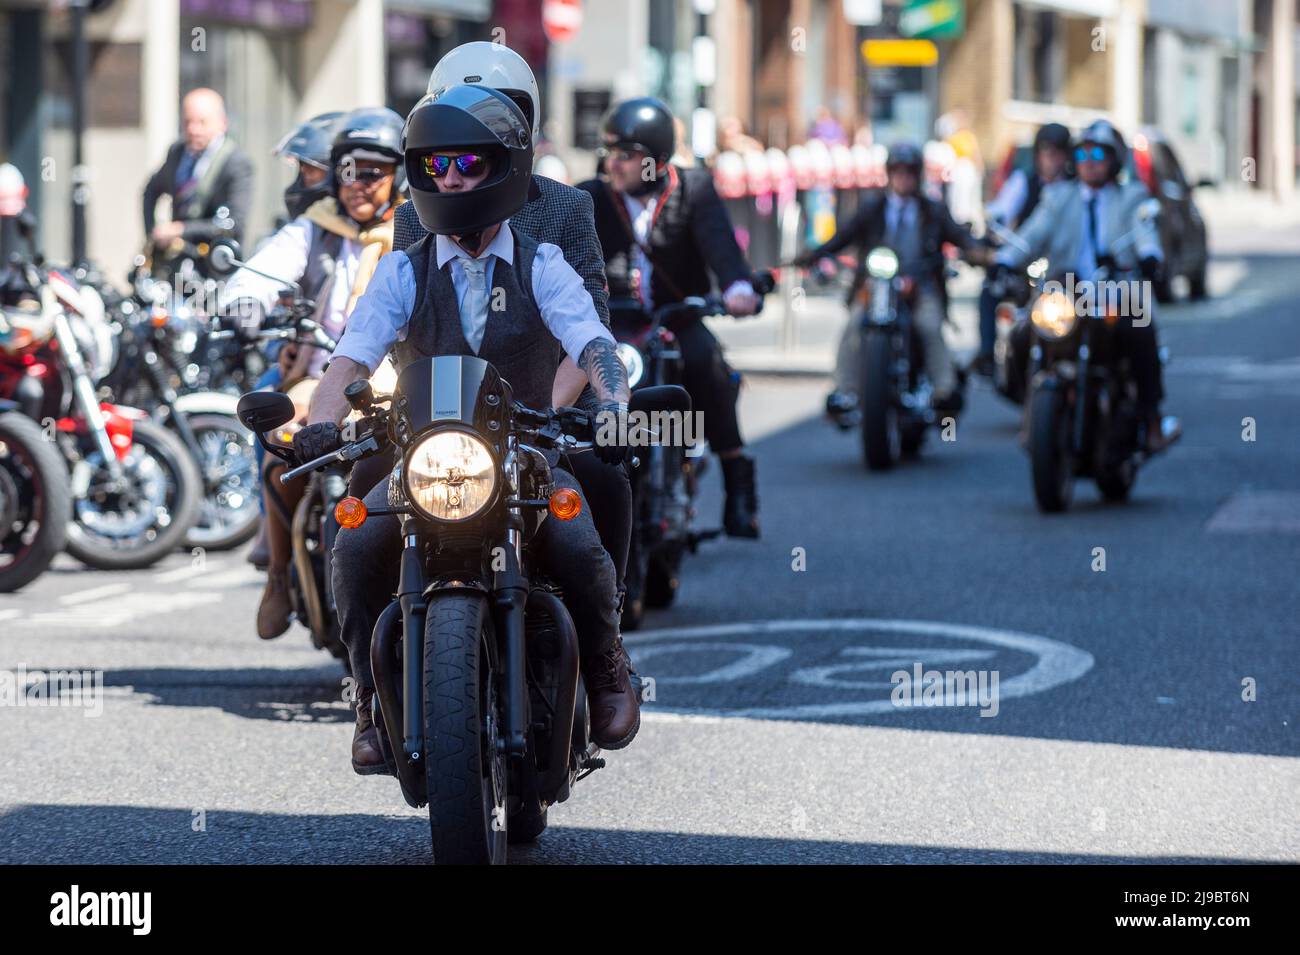 London, UK.  22 May 2022.  Dandily-dressed motorcyclists arrive in Smithfield Market after completing a Distinguished Gentleman’s Ride through central London.  Similar rides are taking place around the world all to raise money and awareness of prostrate cancer and men’s health.  Credit: Stephen Chung / Alamy Live News Stock Photo